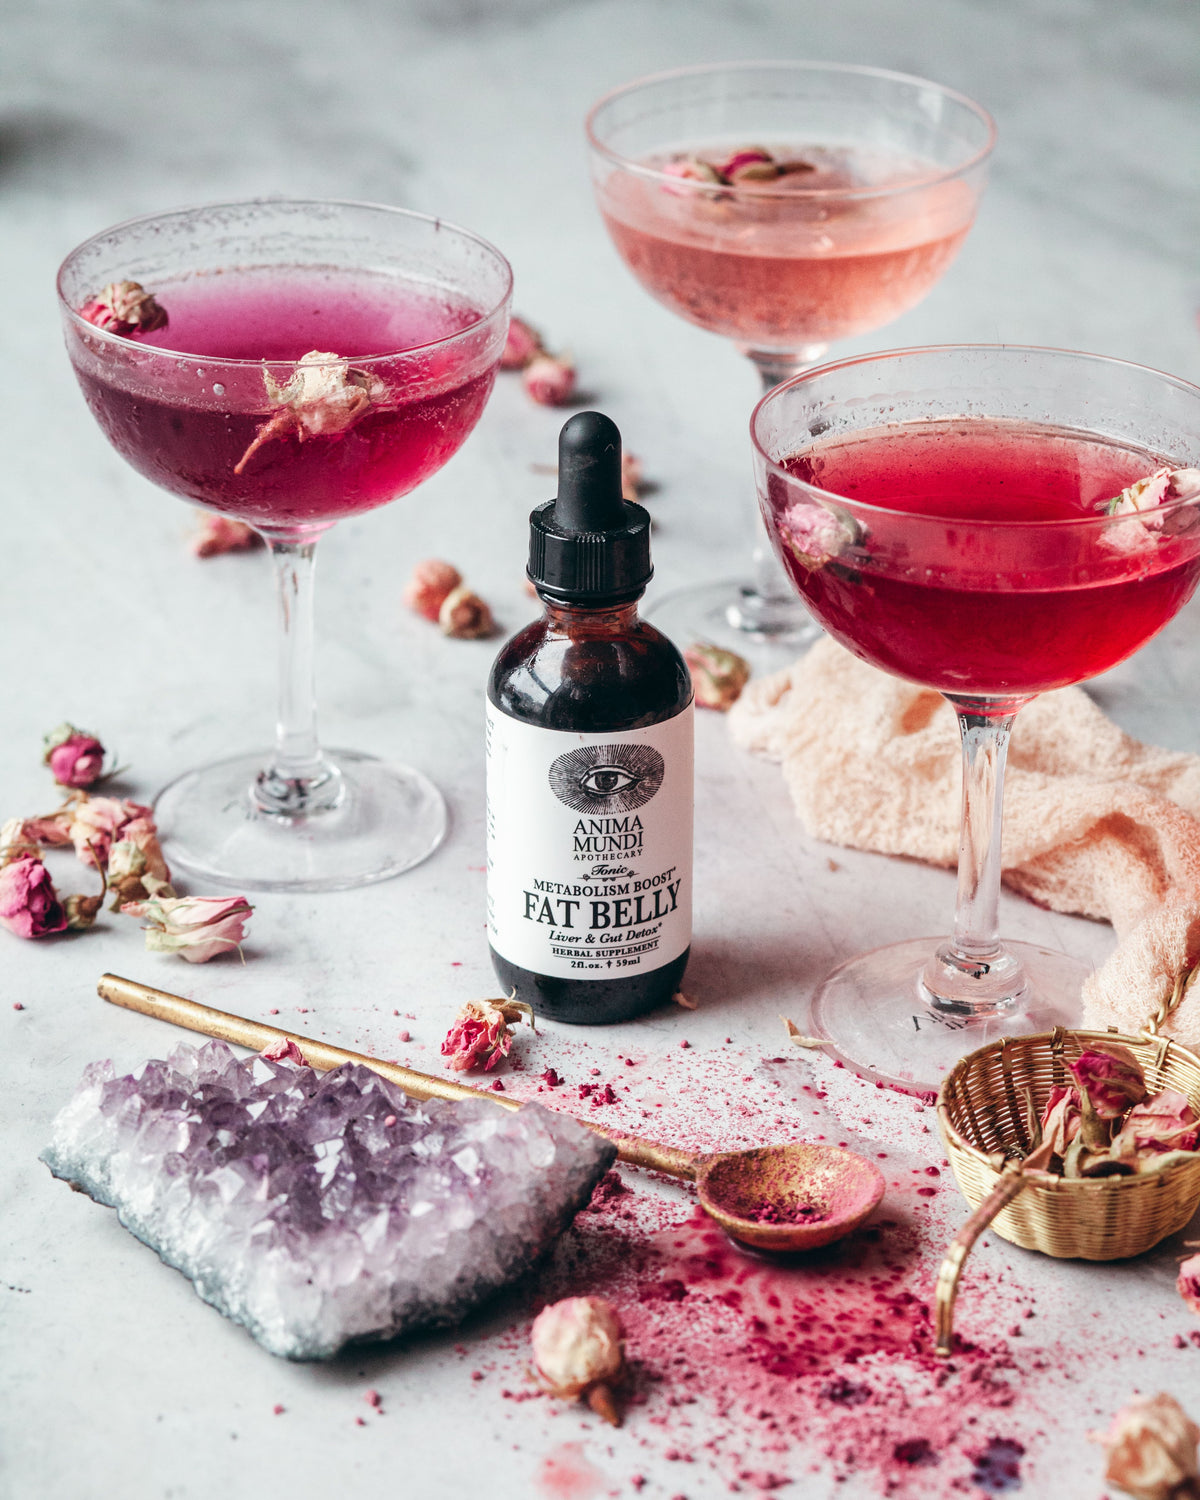 anima mundi fat belly tonic / We live in a world where there is an abundance of bad fats within the marketplace. This formula was designed with the intention to help assist fat breakdown, boost healthy digestion, detox and to boost metabolism. 